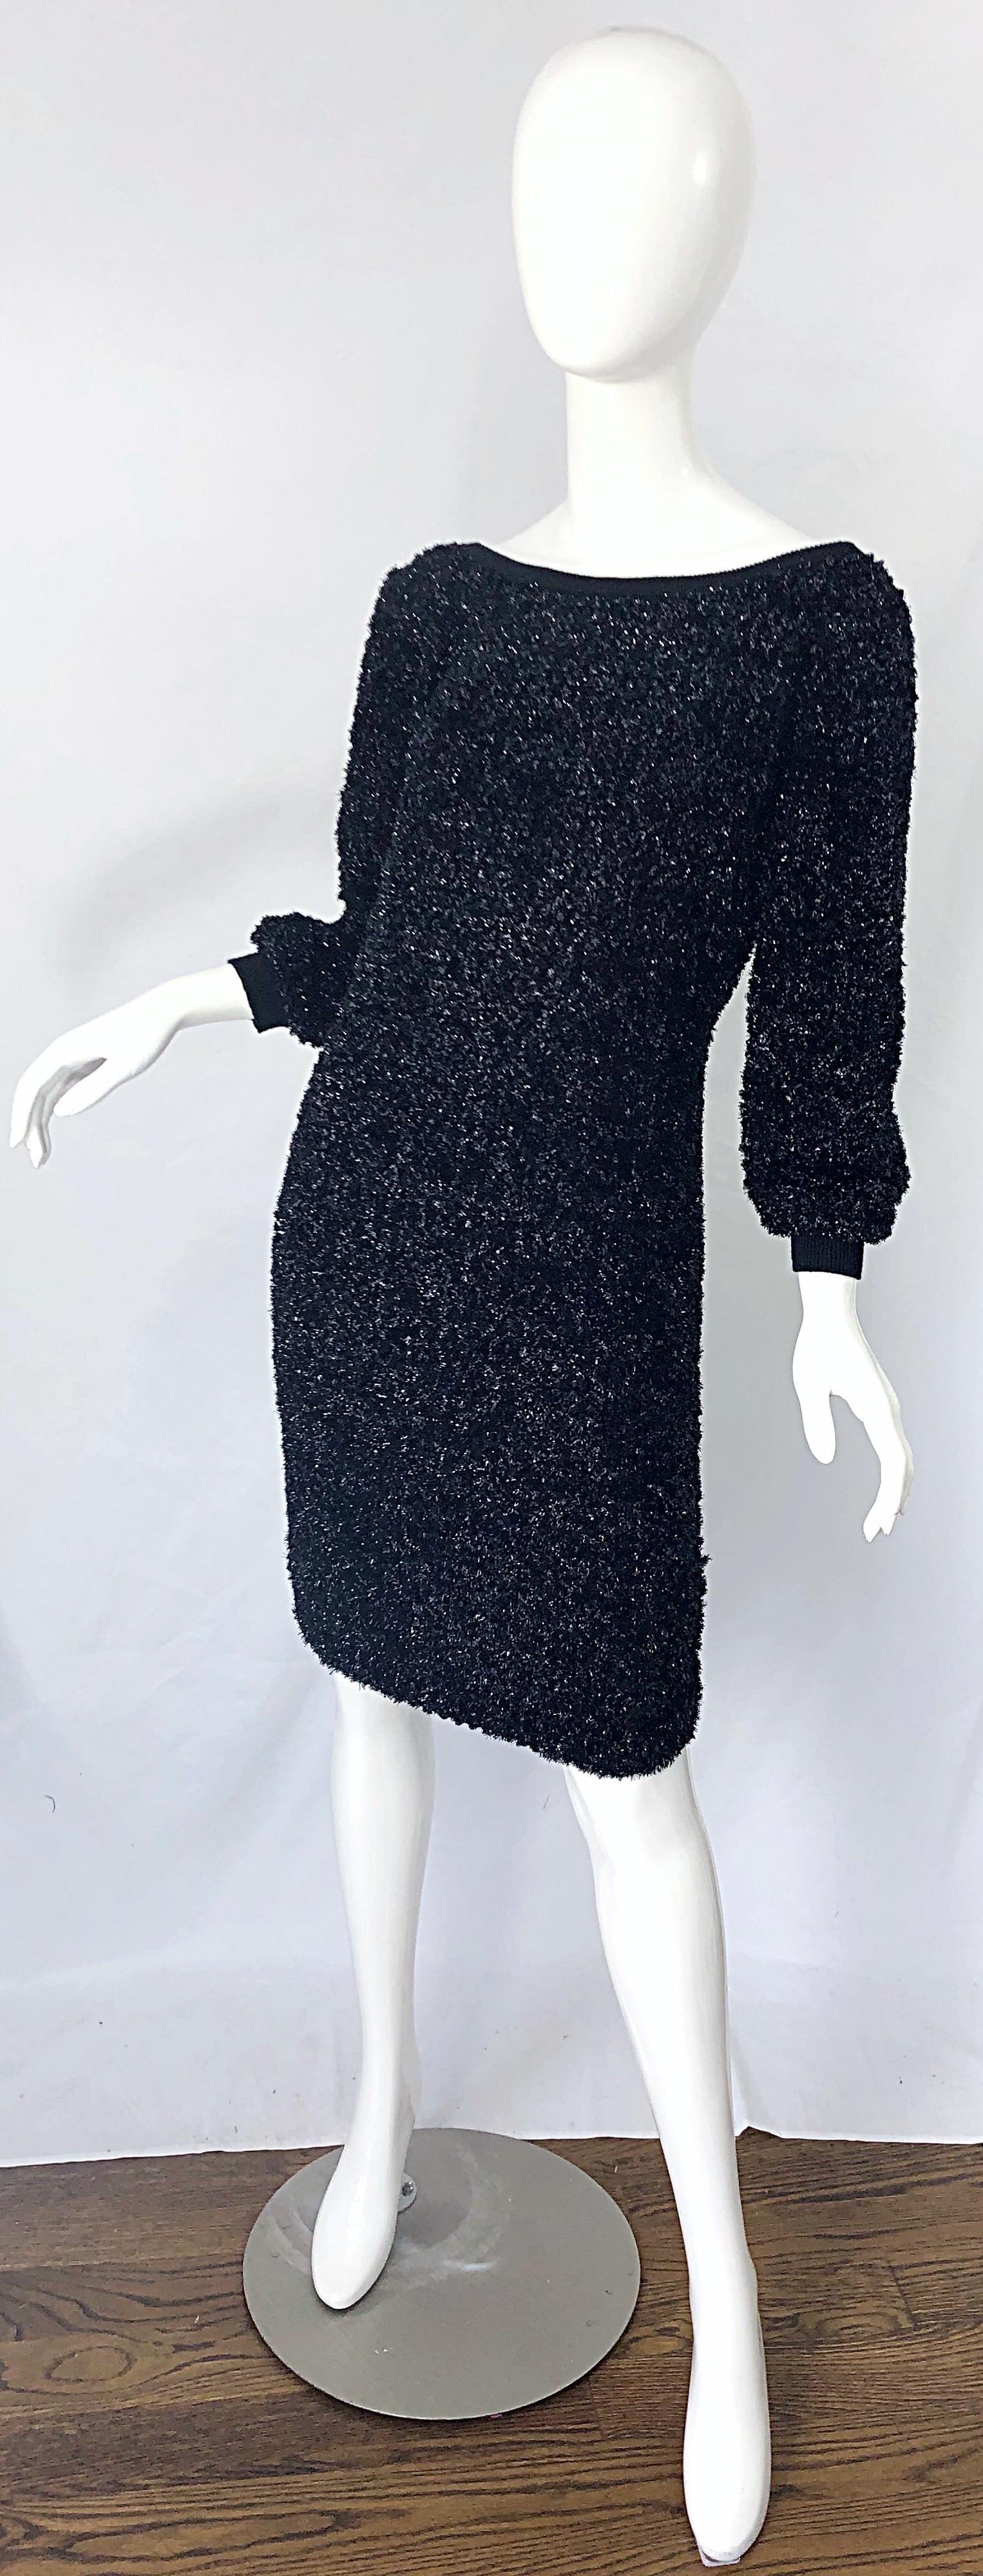 Vintage Yves Saint Laurent 1990s Black Metallic Tinsel Off - Shoulder 90s Dress In Excellent Condition For Sale In San Diego, CA